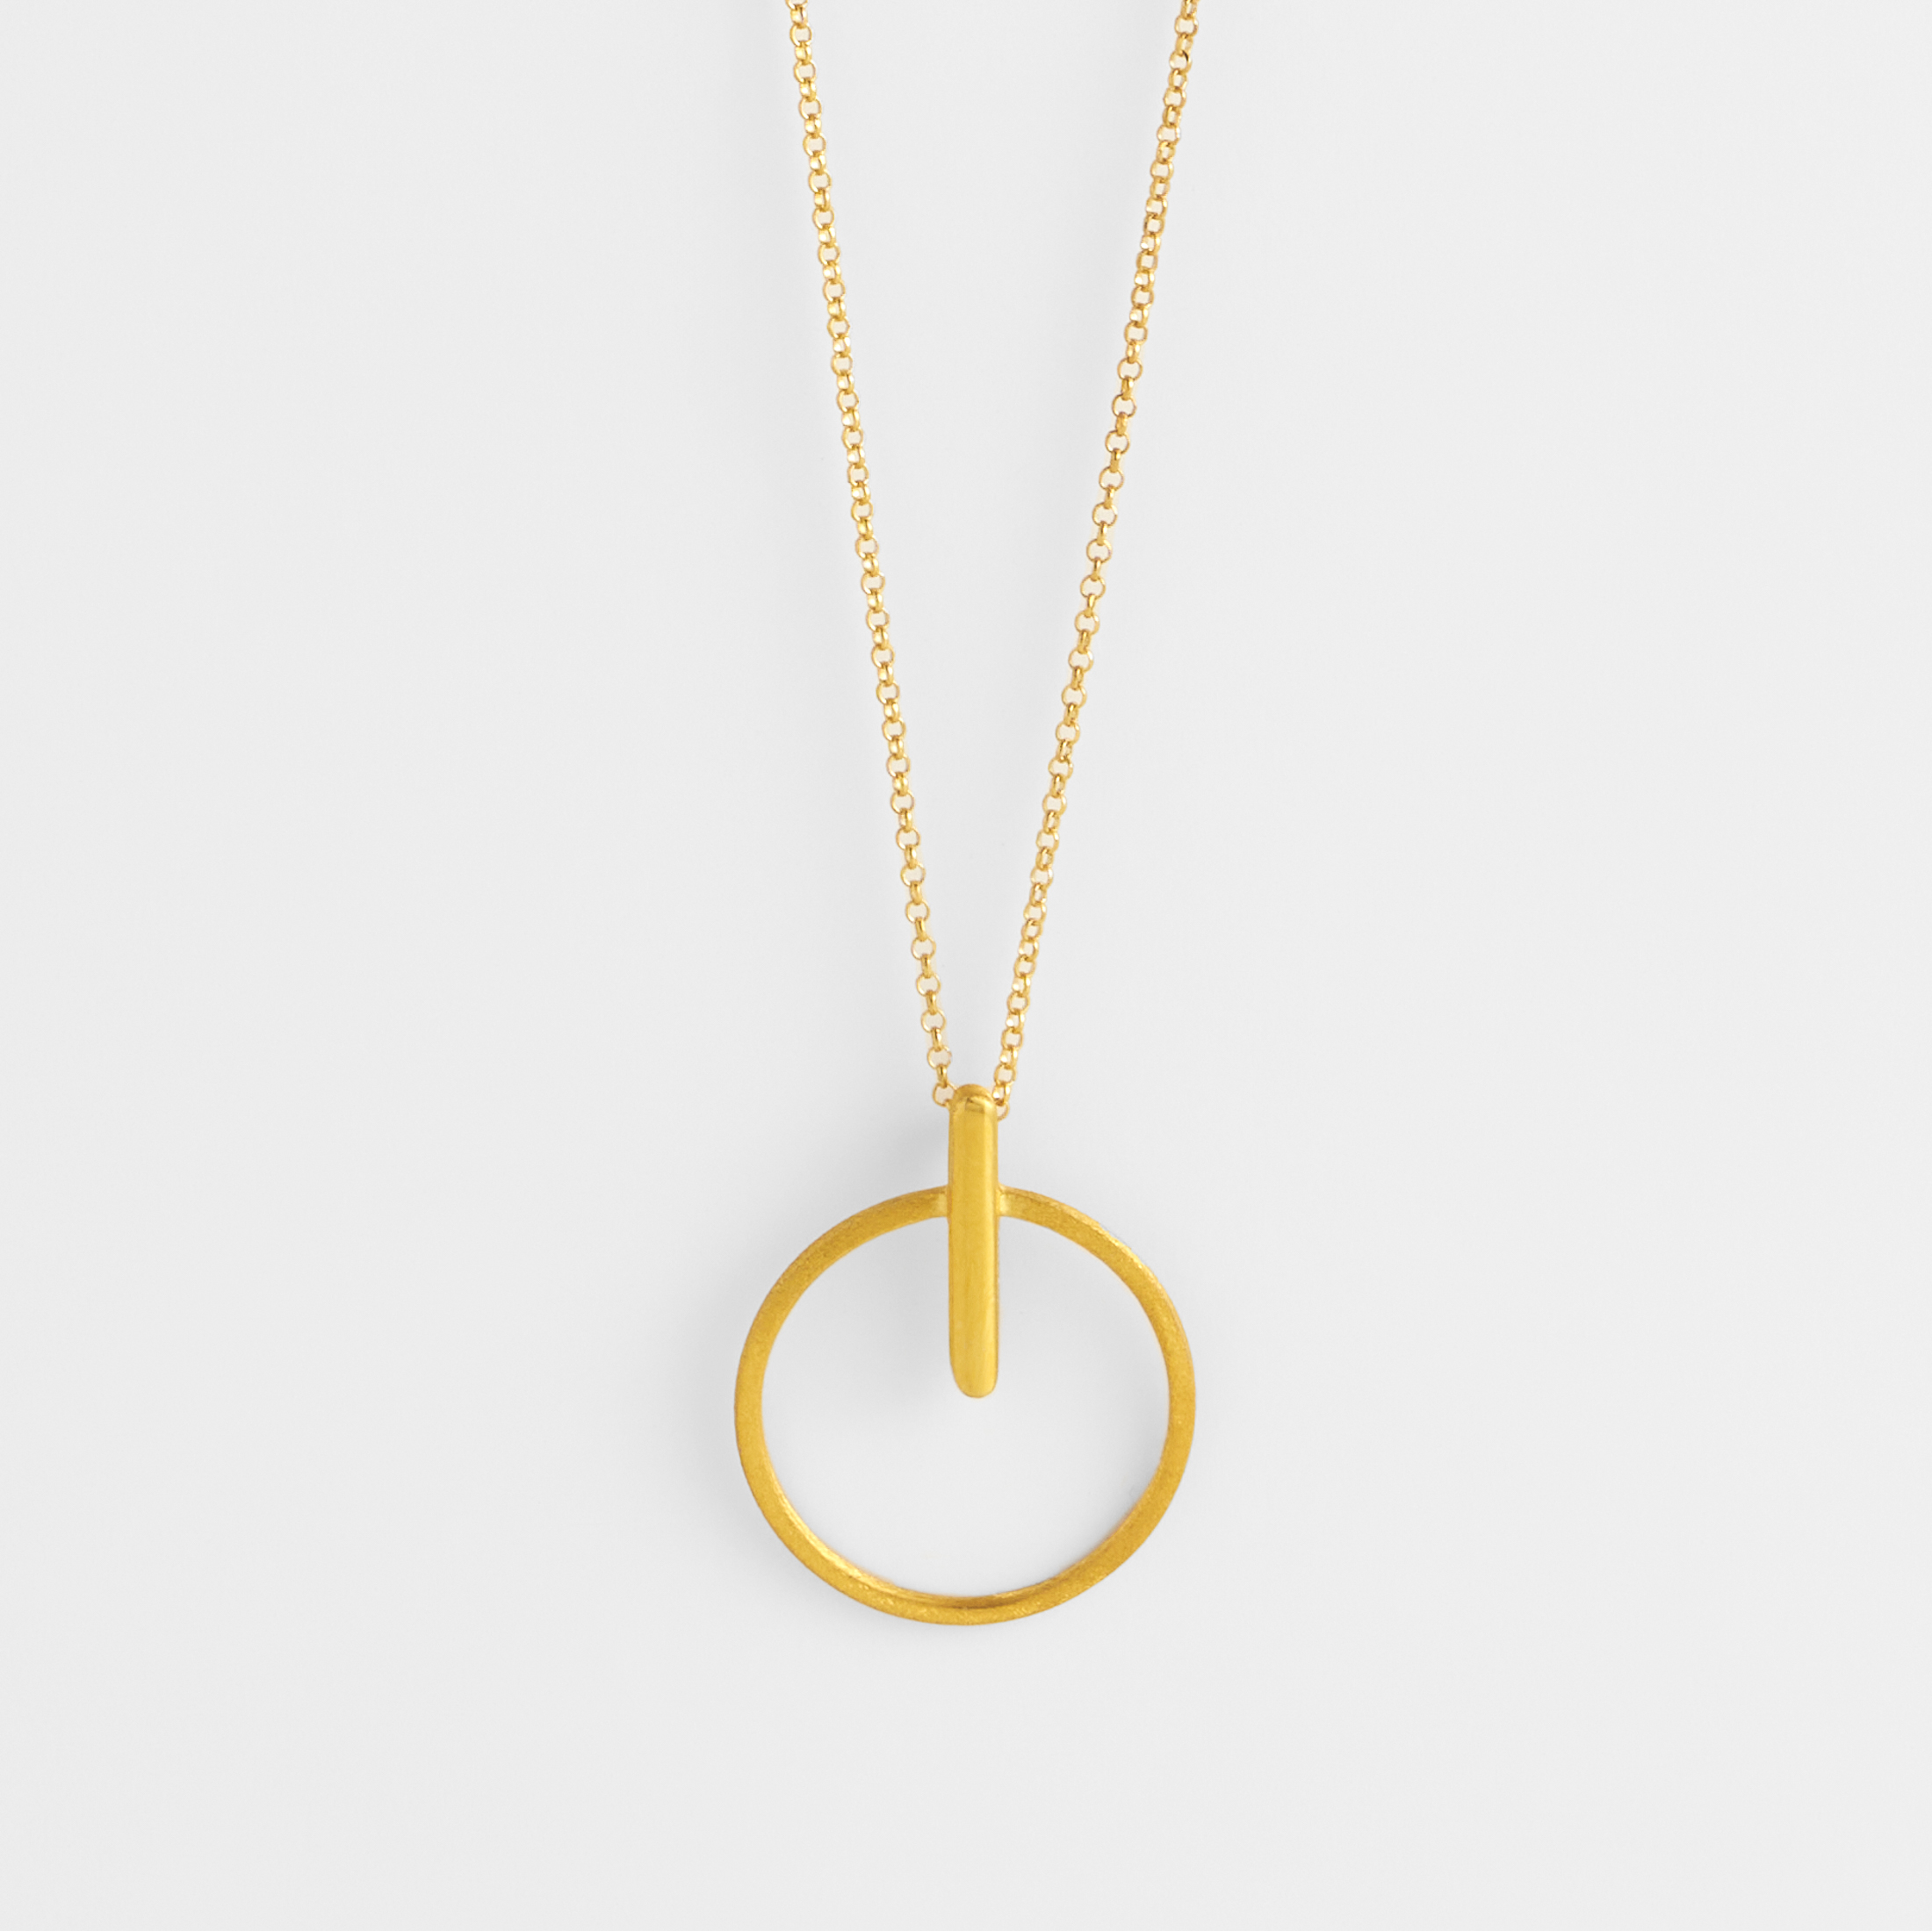 Switch Necklace - 